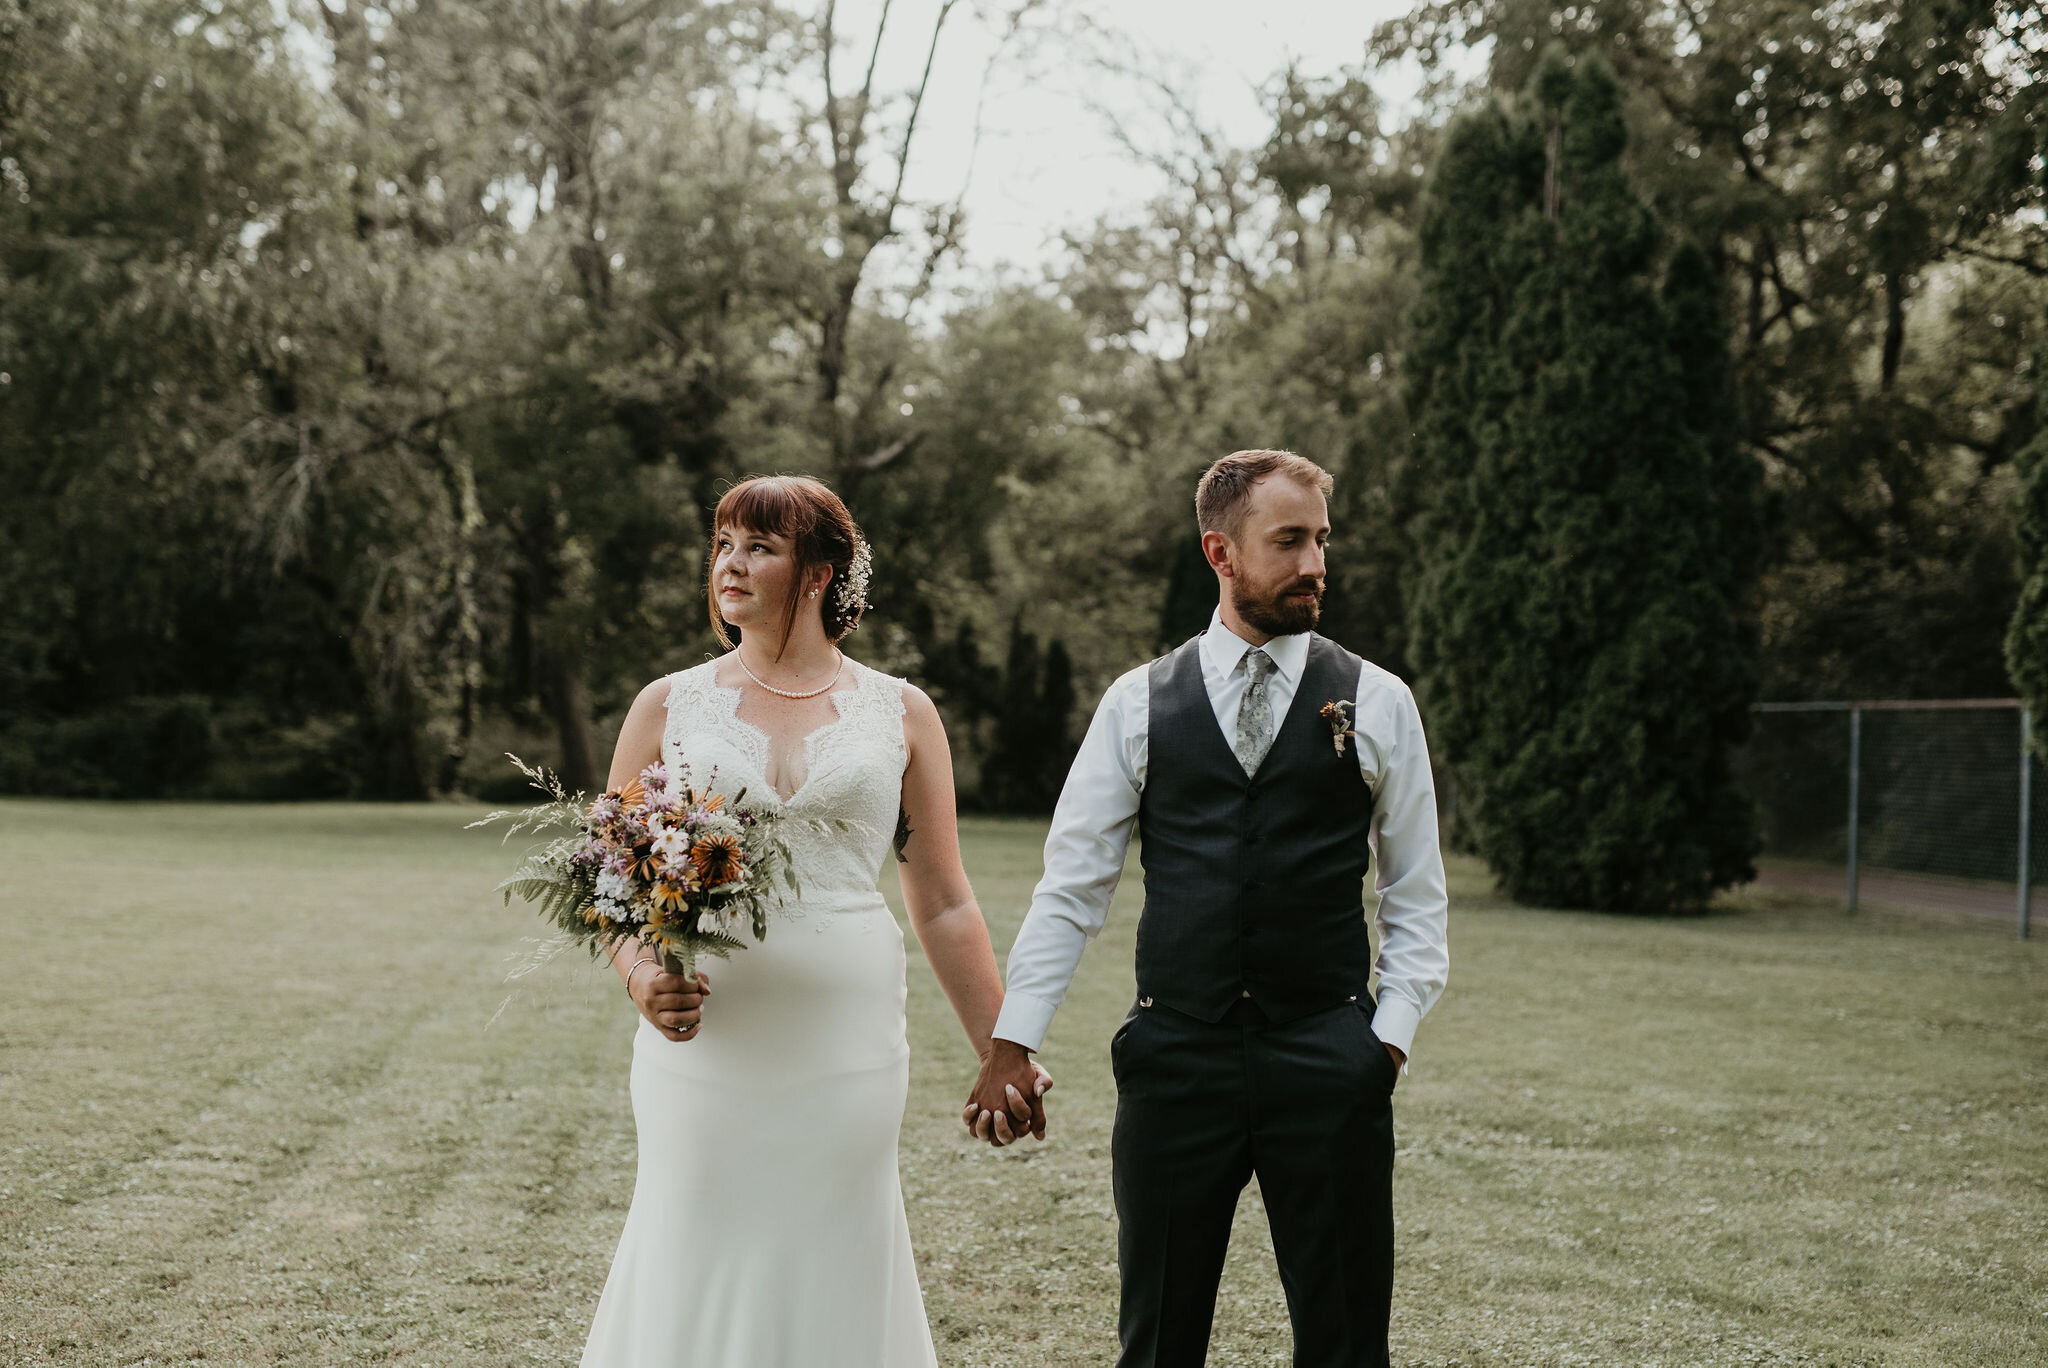 This bucks county, Pennsylvania backyard wedding turned out more perfect then imagined for Lauren an John who decided to elope this summer at home with their closest friends and family. Photographed by Rachel Betson Photography